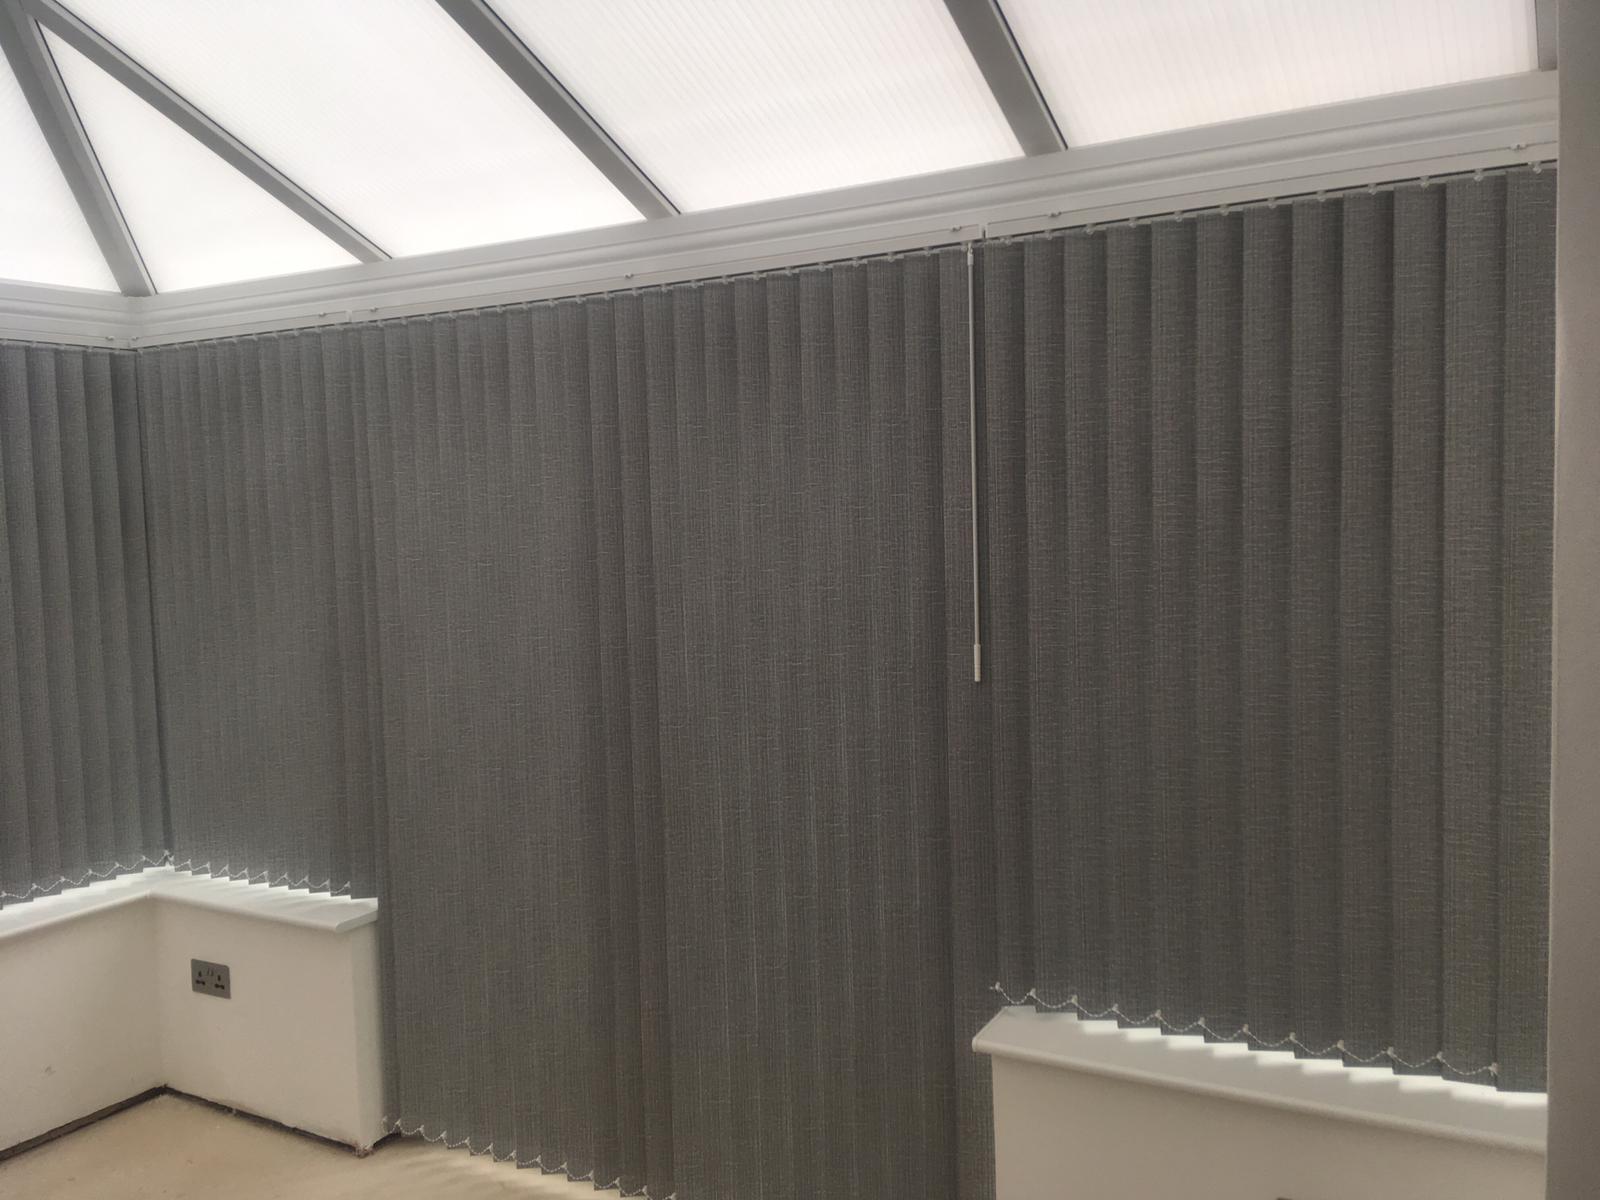 Dimout Vertical Blinds For Sunlight Control Retford